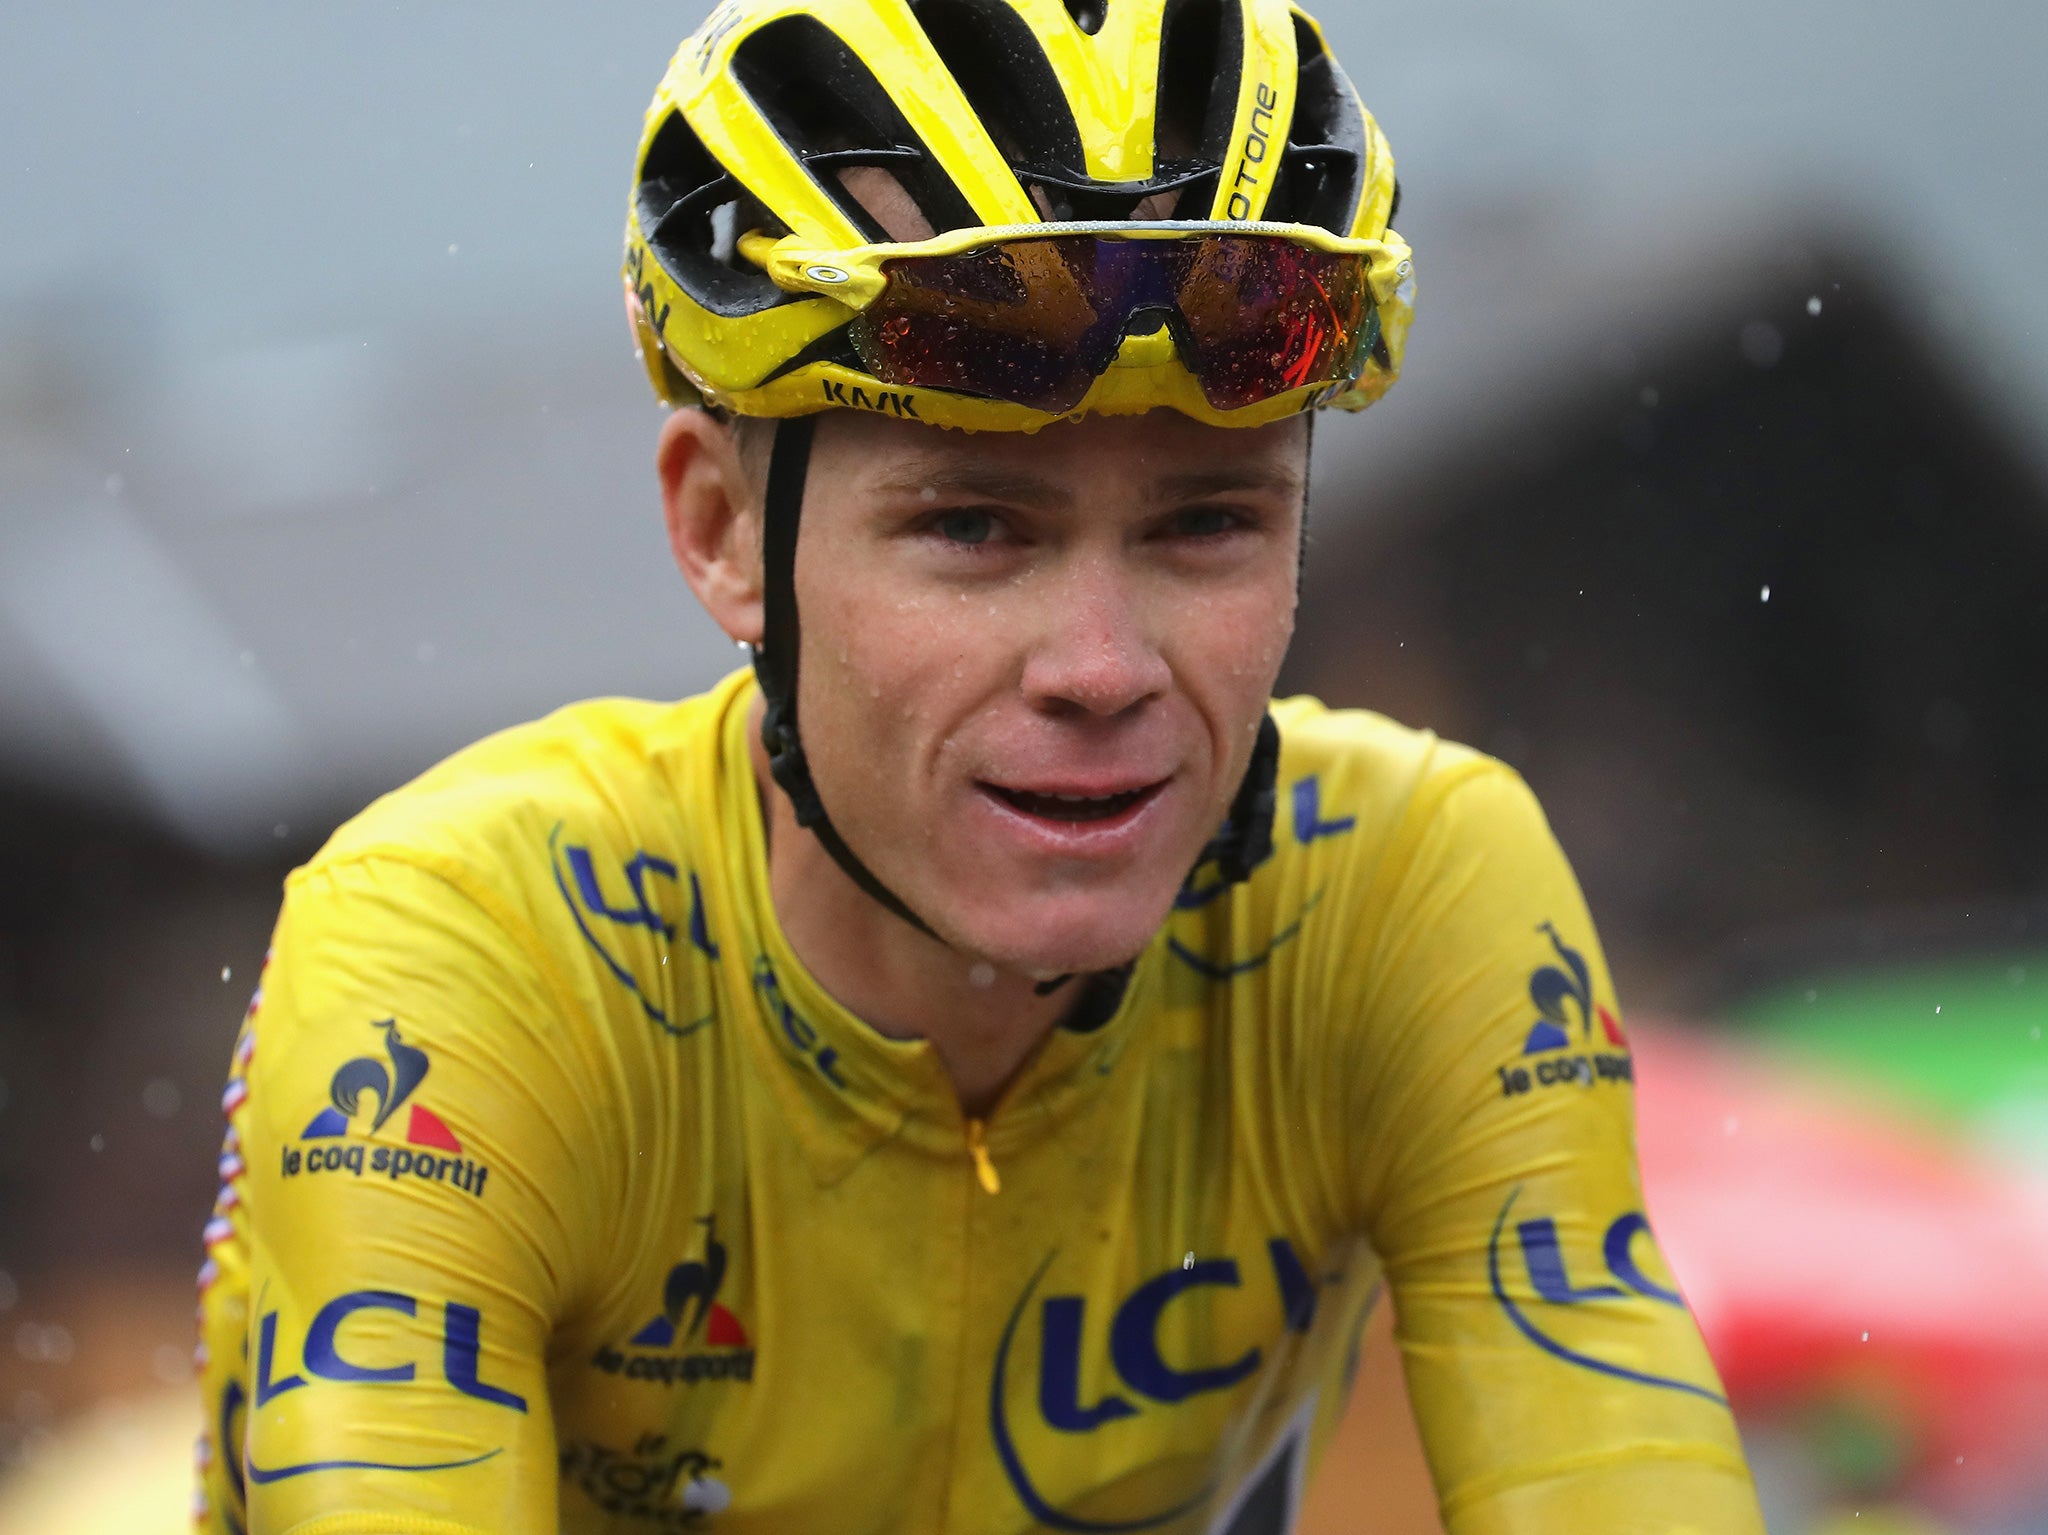 Froome negotiated a slippery descent and crossed the line unscathed